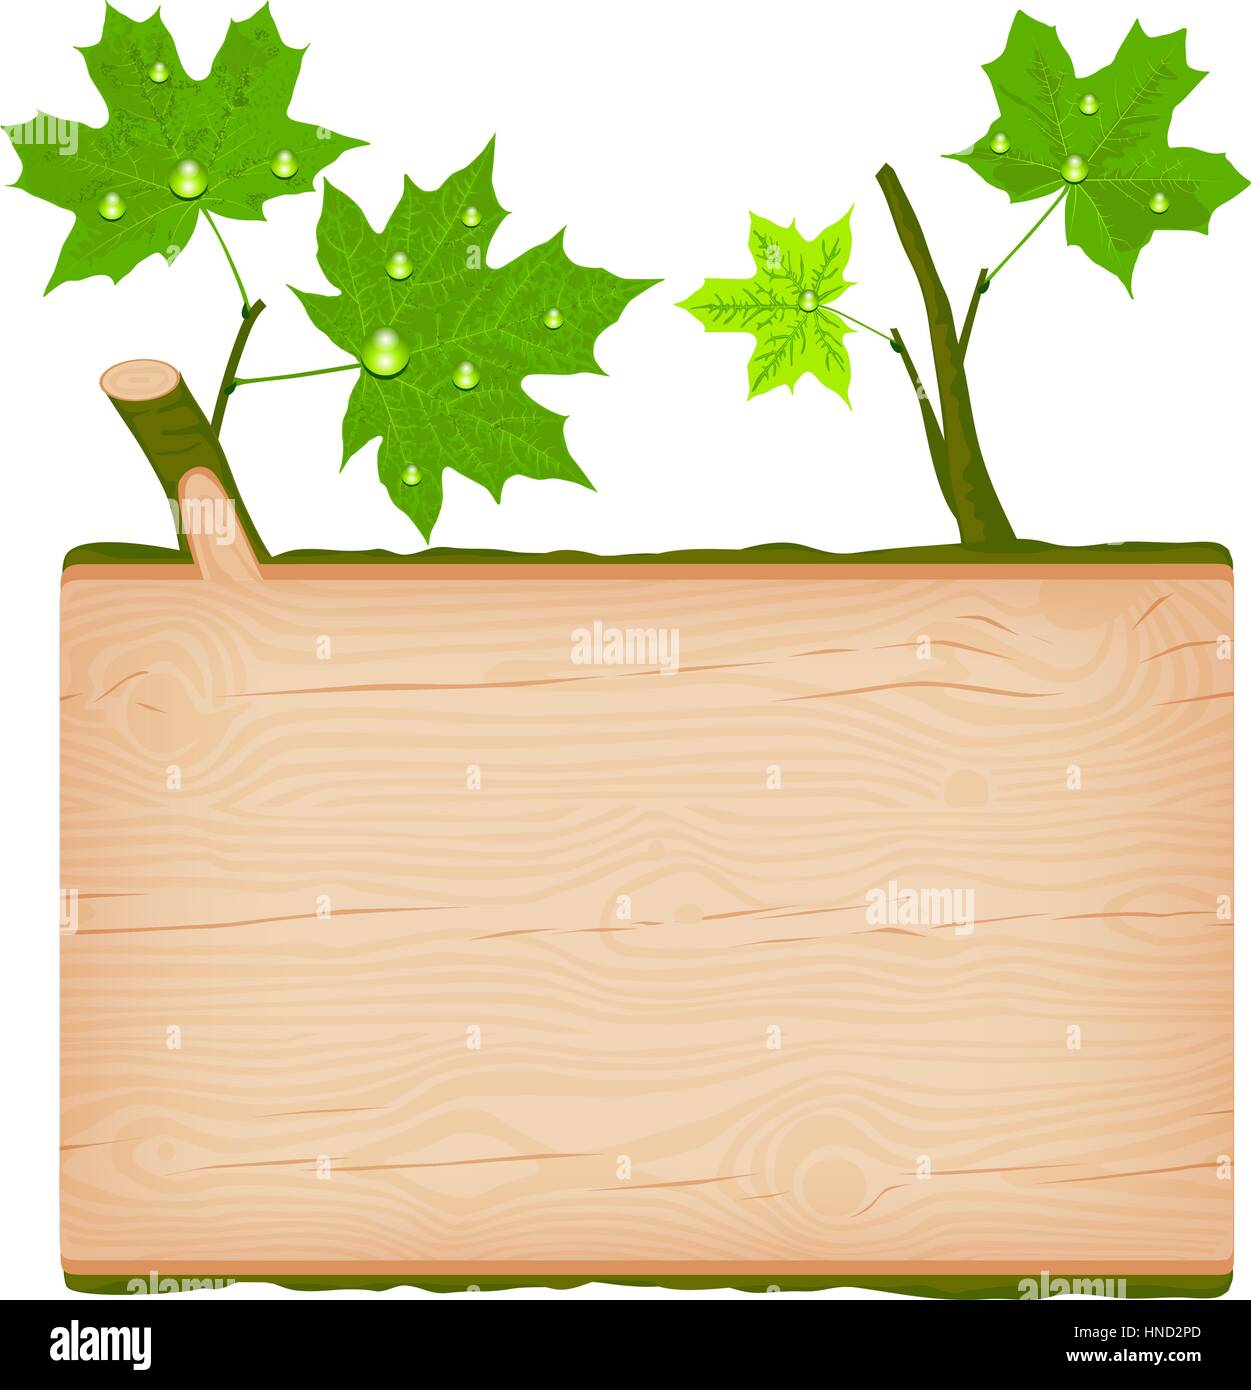 Natural textured maple wooden rectangular signboard with green leaves and water drops vector illustration Stock Vector